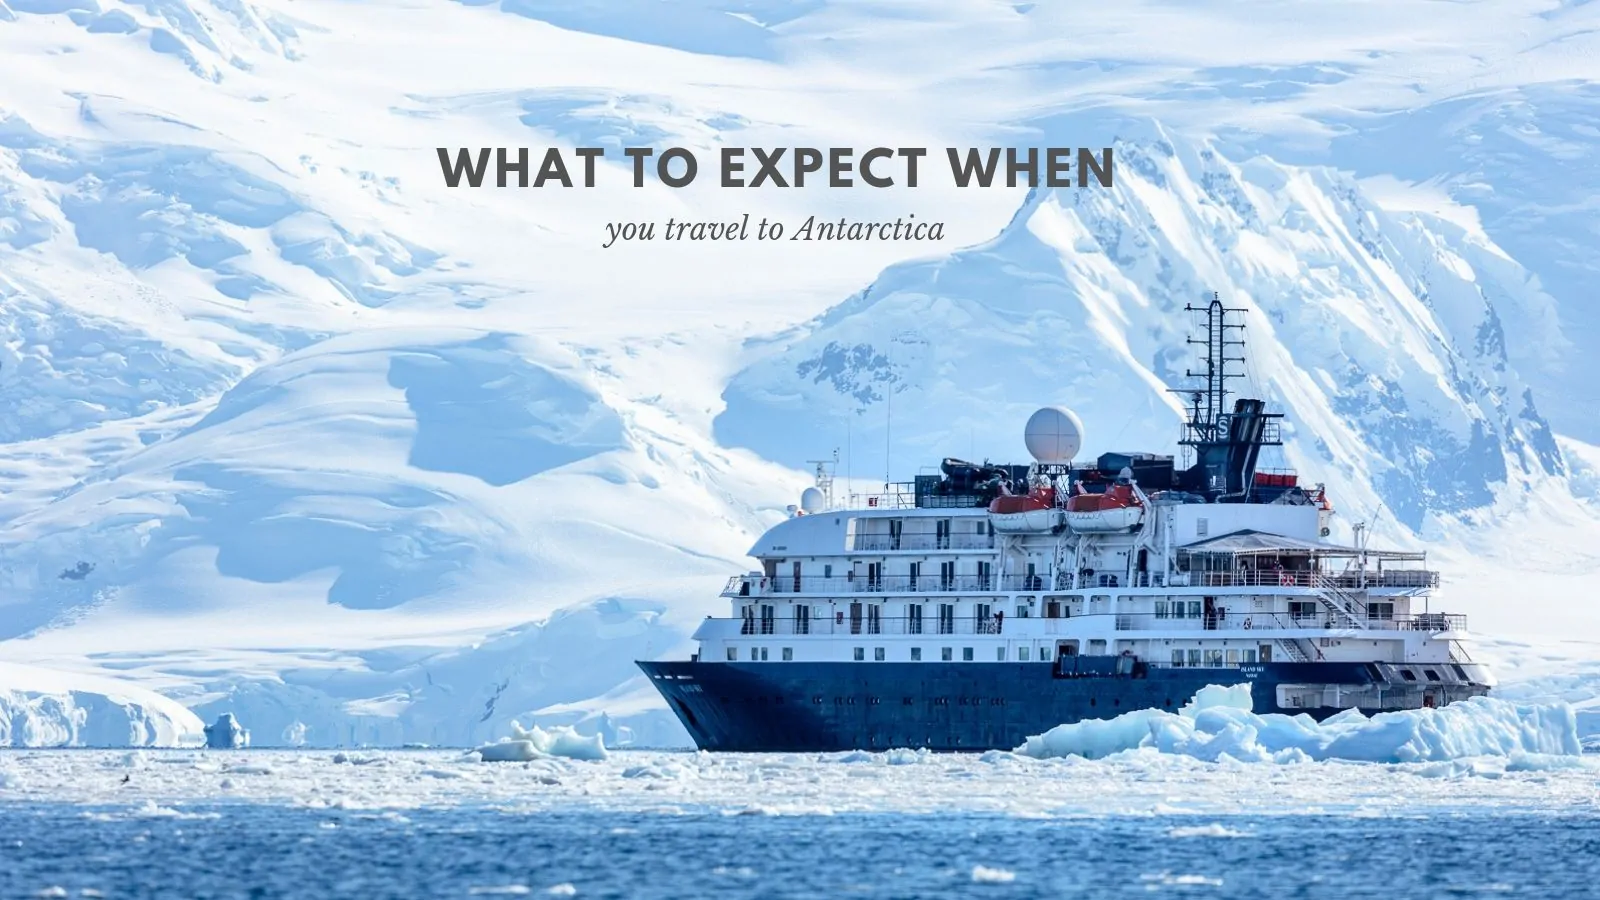 What to expect when you travel to Antarctica